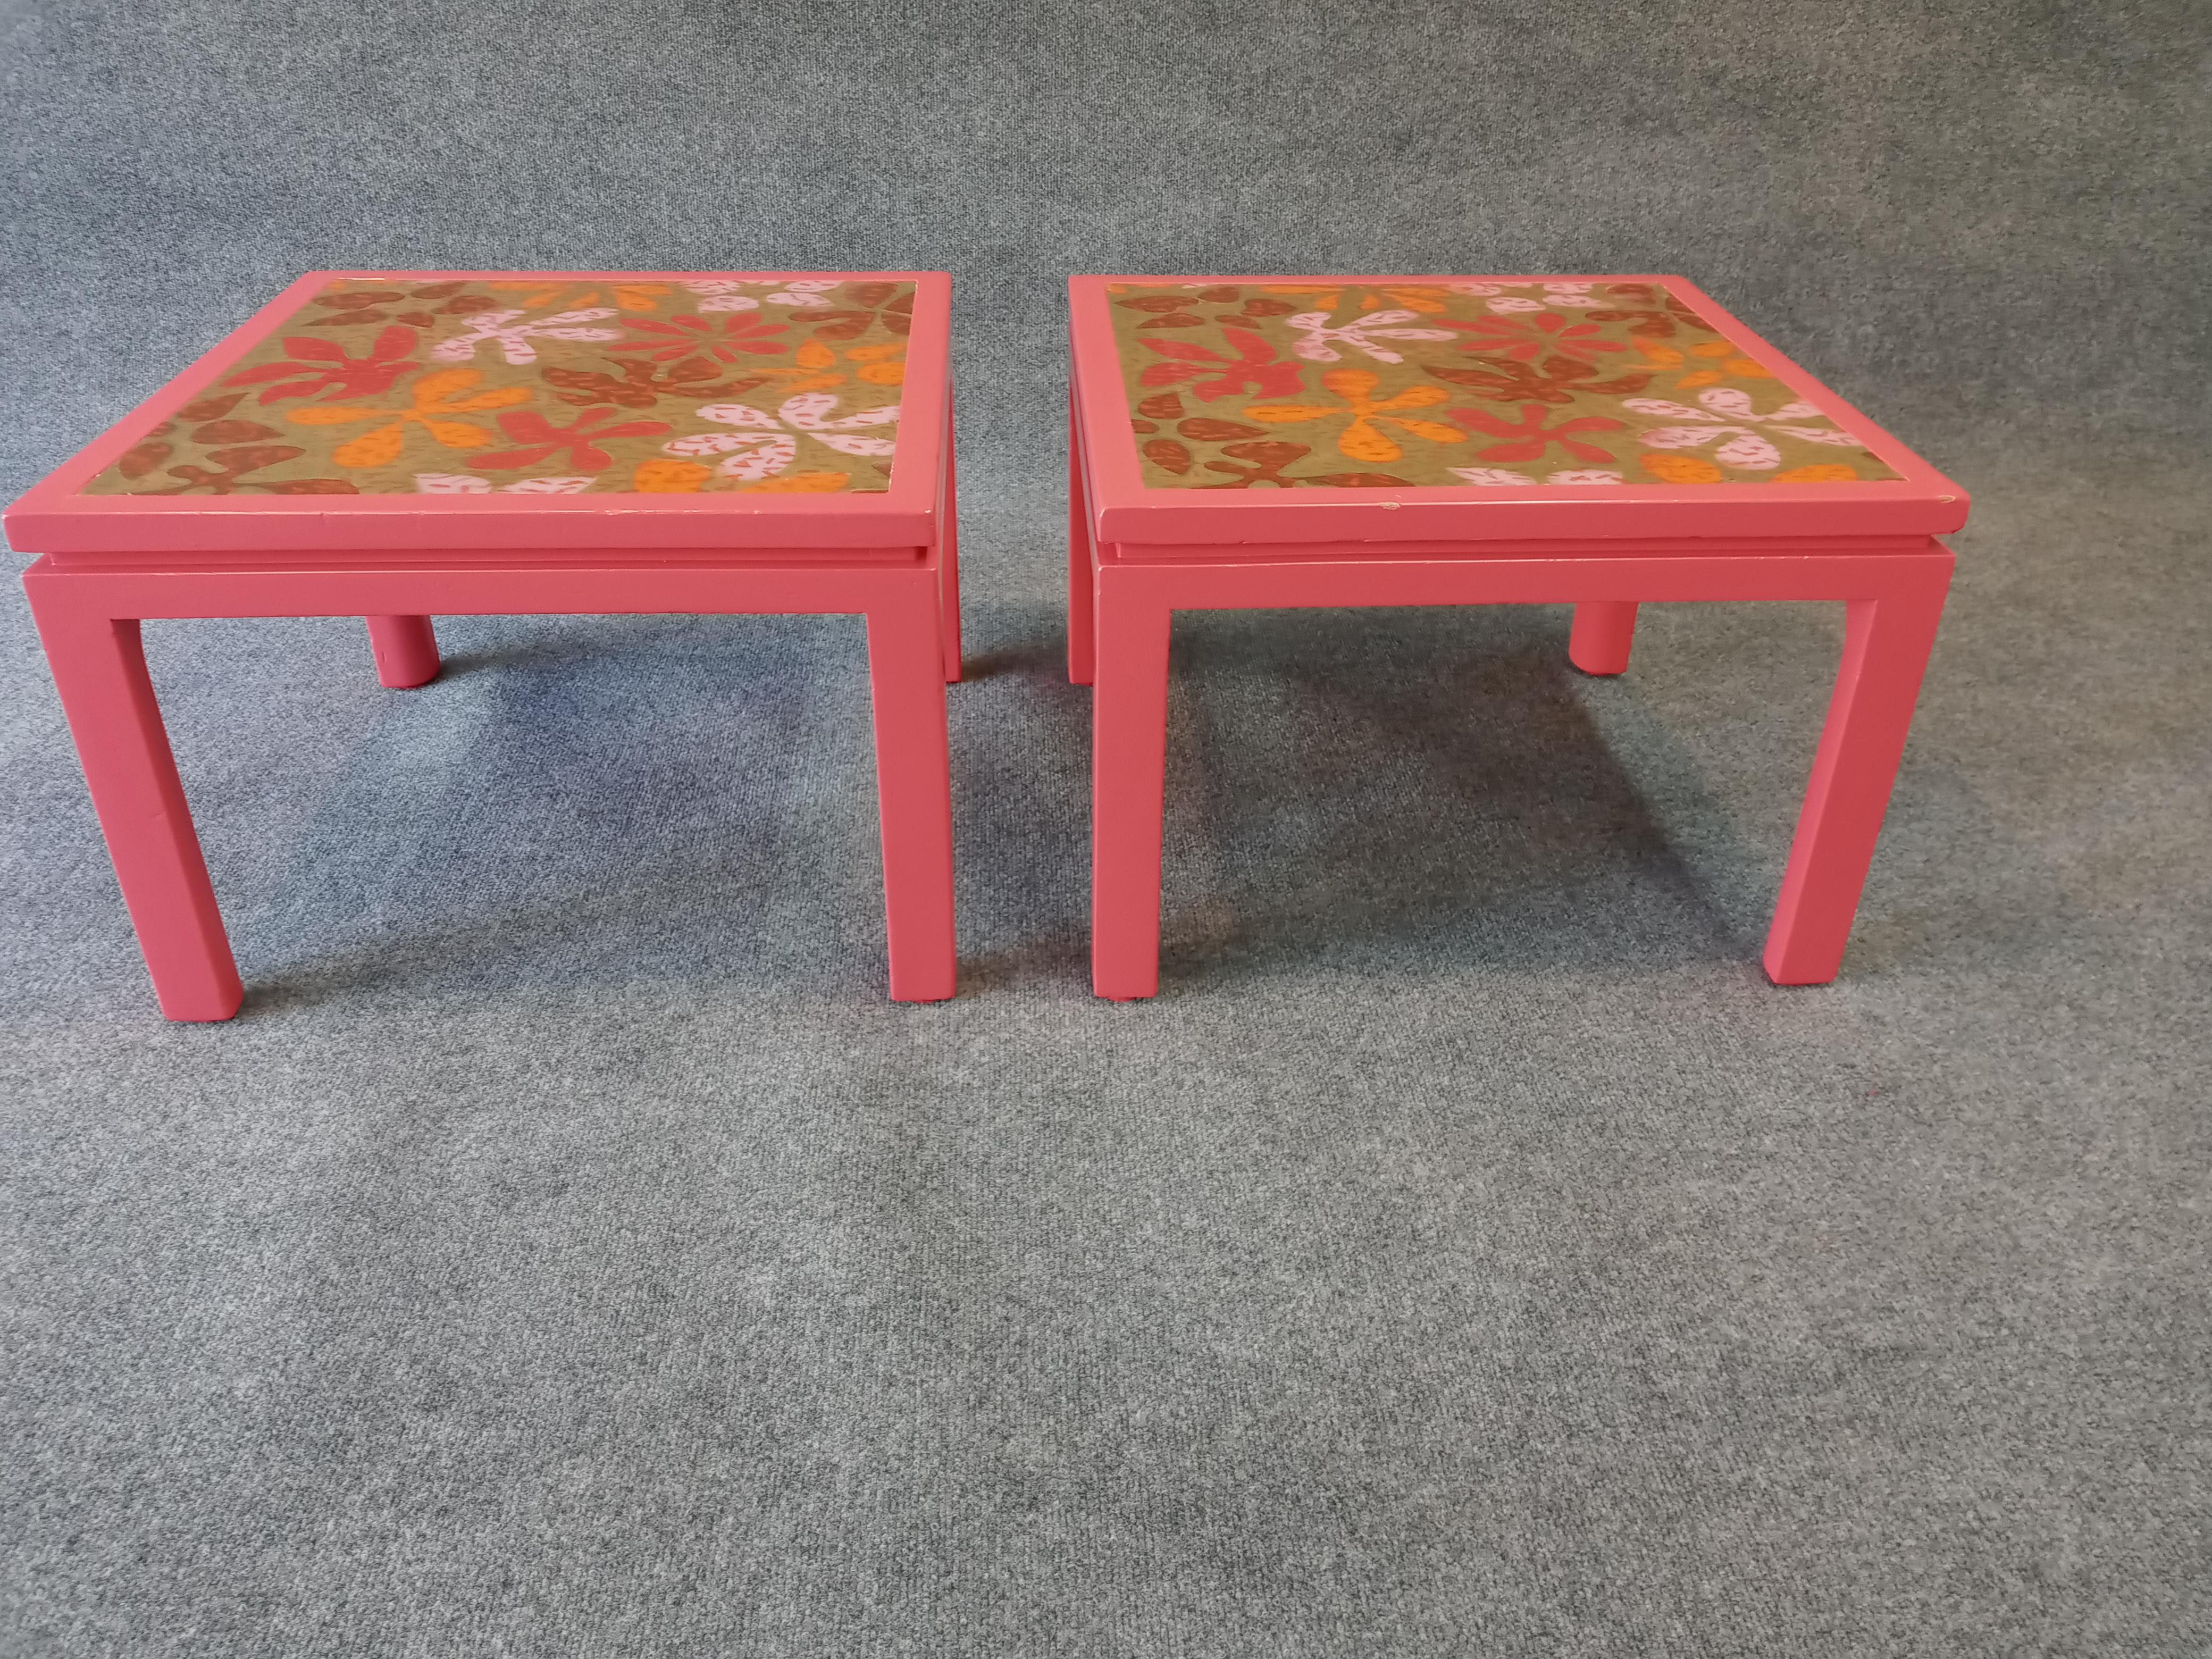 Rare 1960s psychedelic flower design side tables with baked enamel on copper inset panels. With era-appropriate vibrant enamel on original mahogany bases. The tops have a durable and luxurious finish with only minor chips to each. The bases have